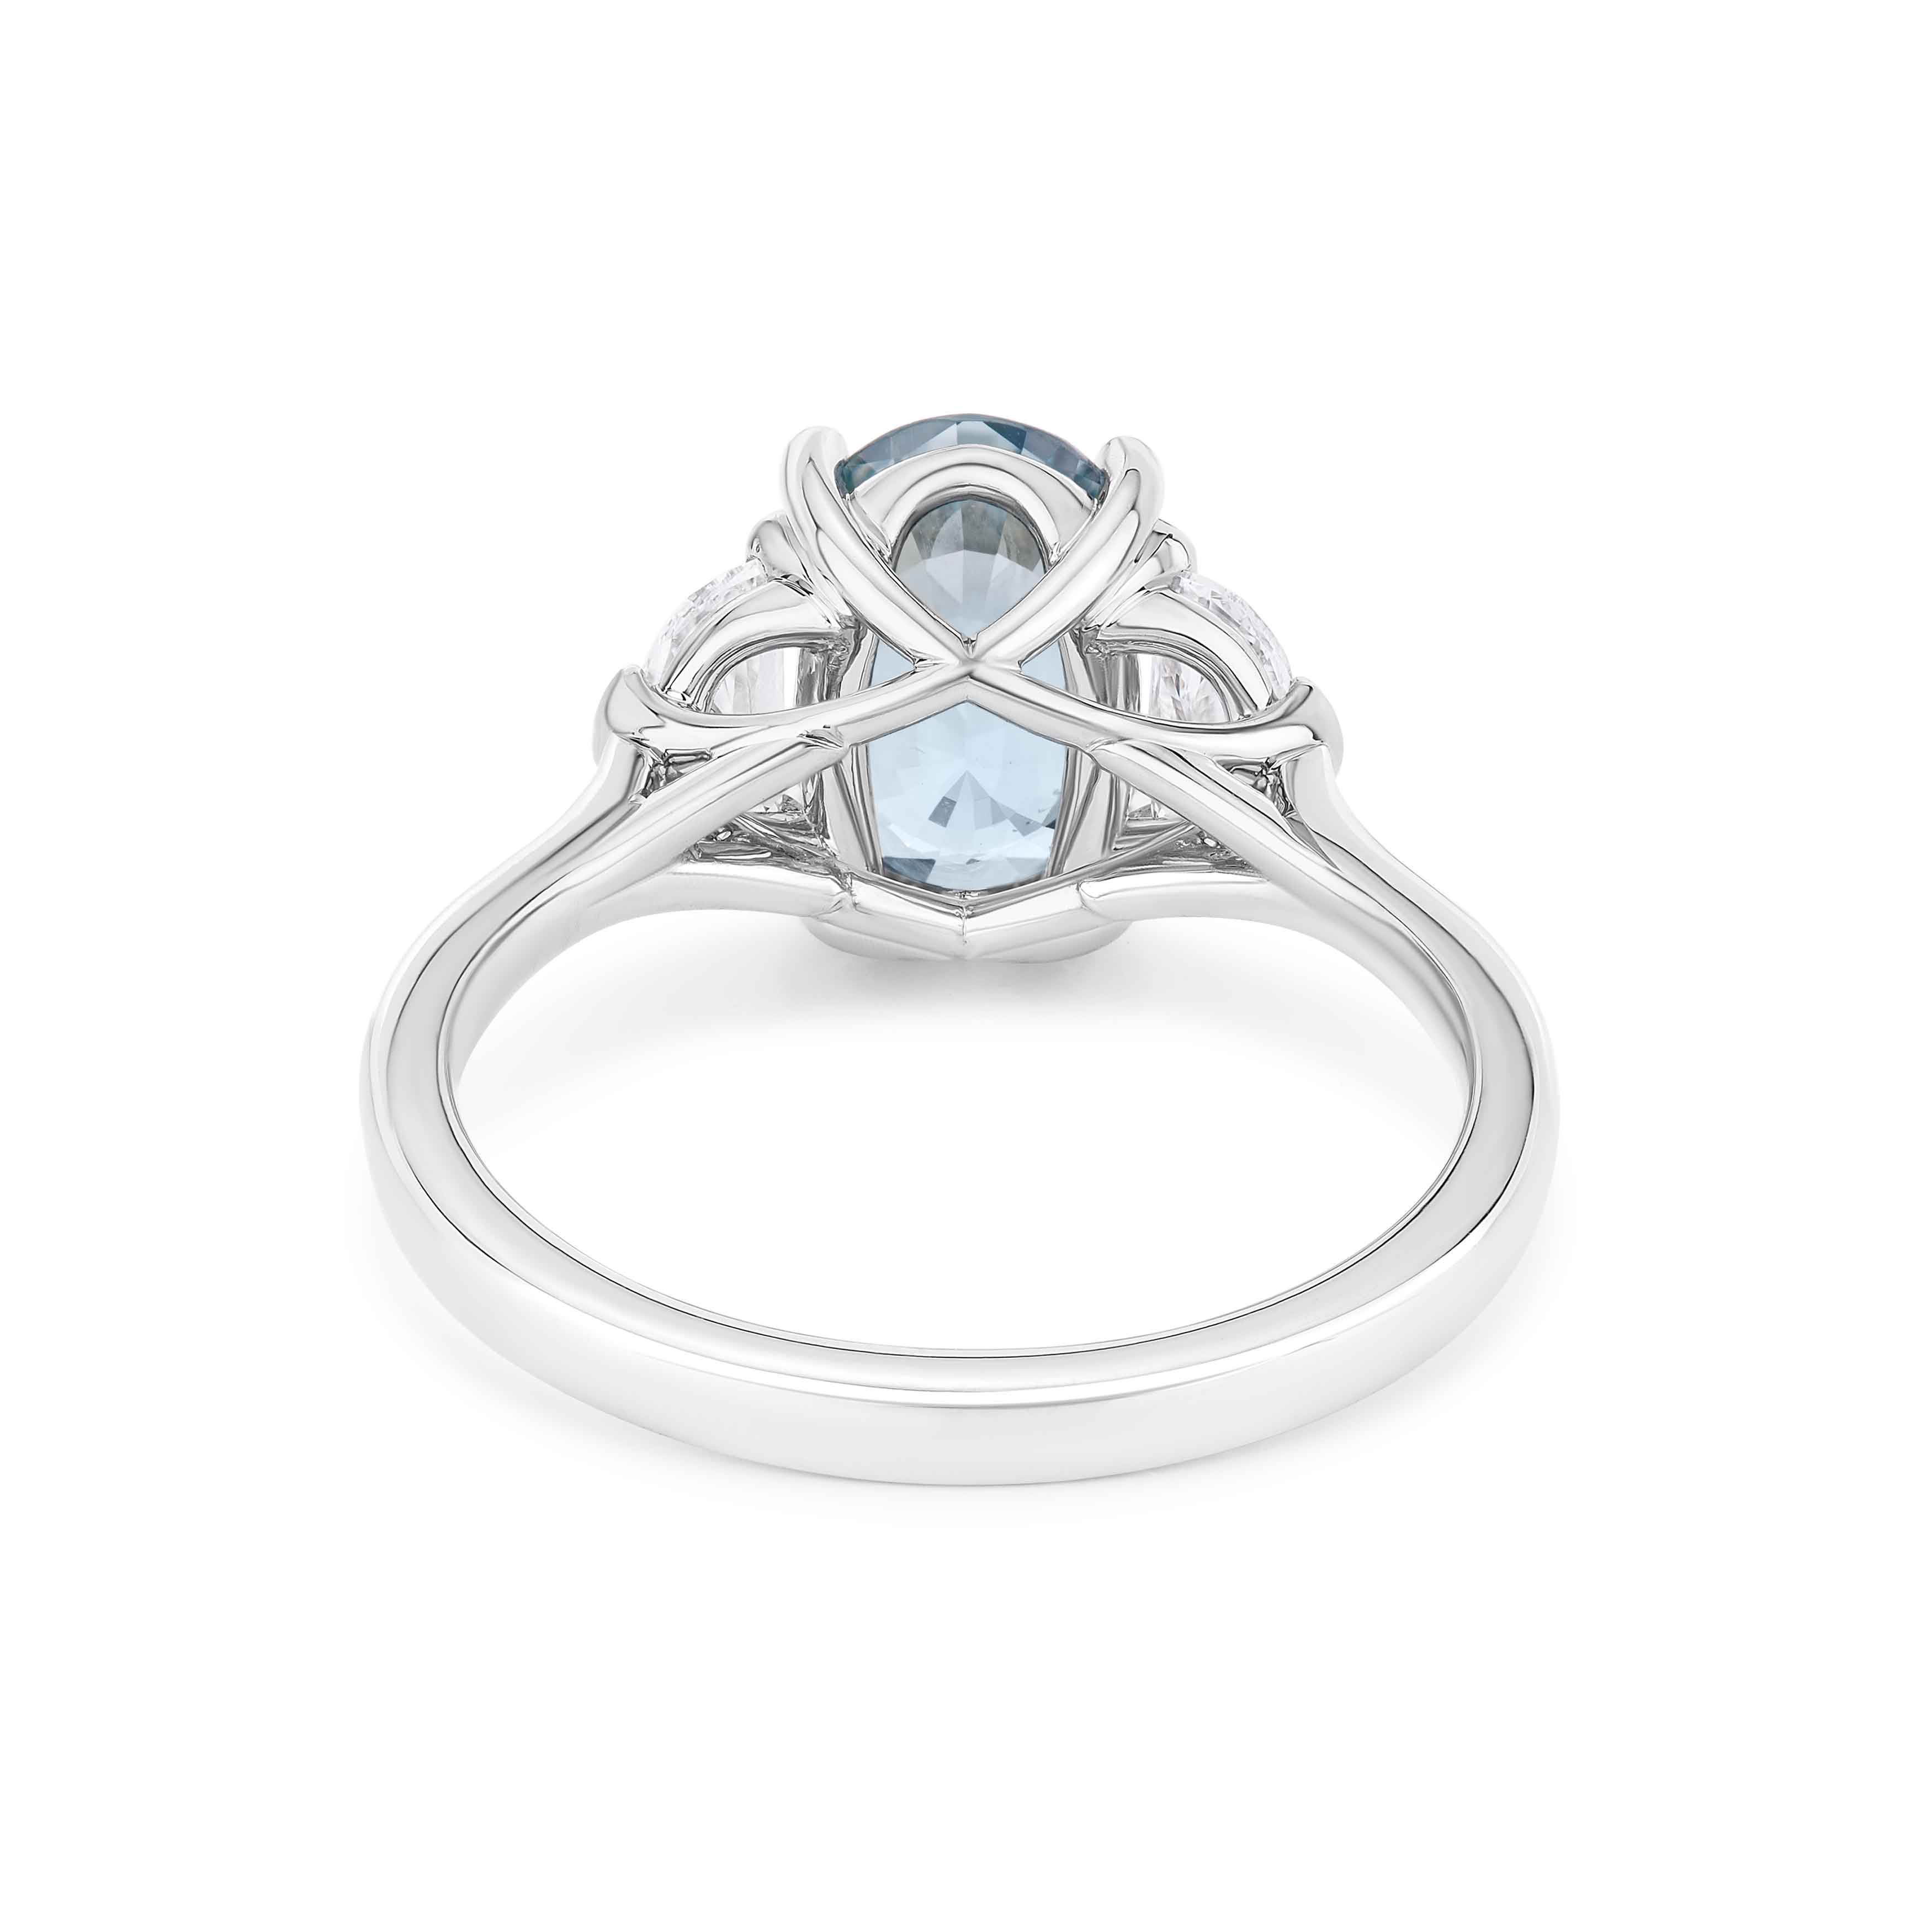 Moira Patience Fine Jewellery Ghlas Oval Pale Blue Sapphire and Diamond Engagement Ring in Edinburgh